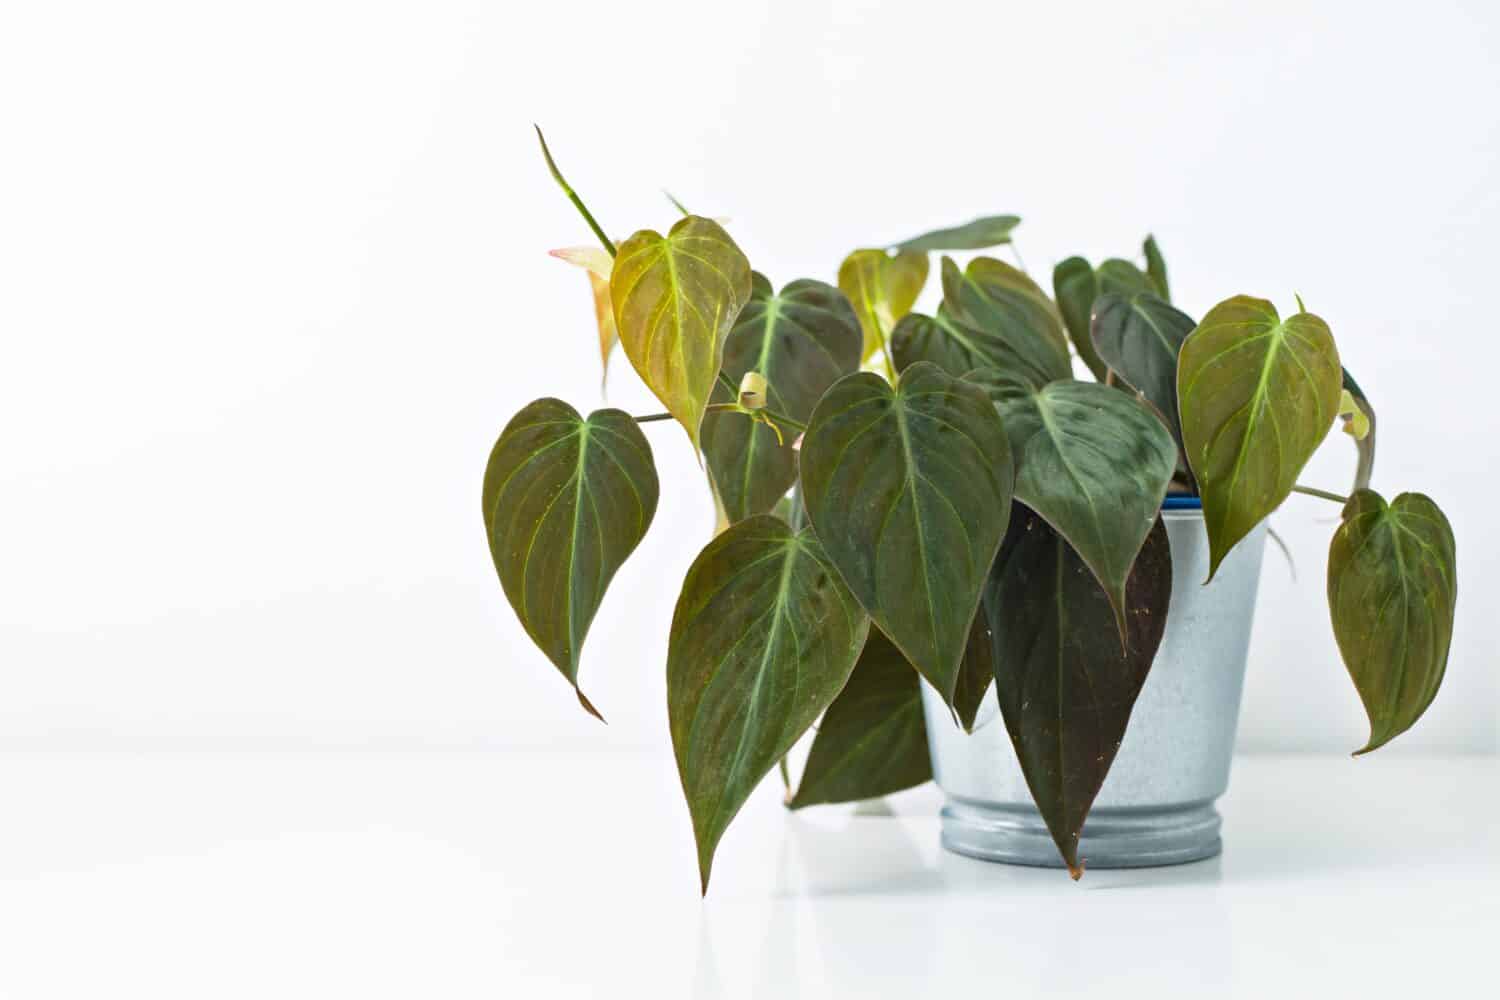 Philodendron Micans leaves on a white background, creative tropical plant concept. Home interior decoration.